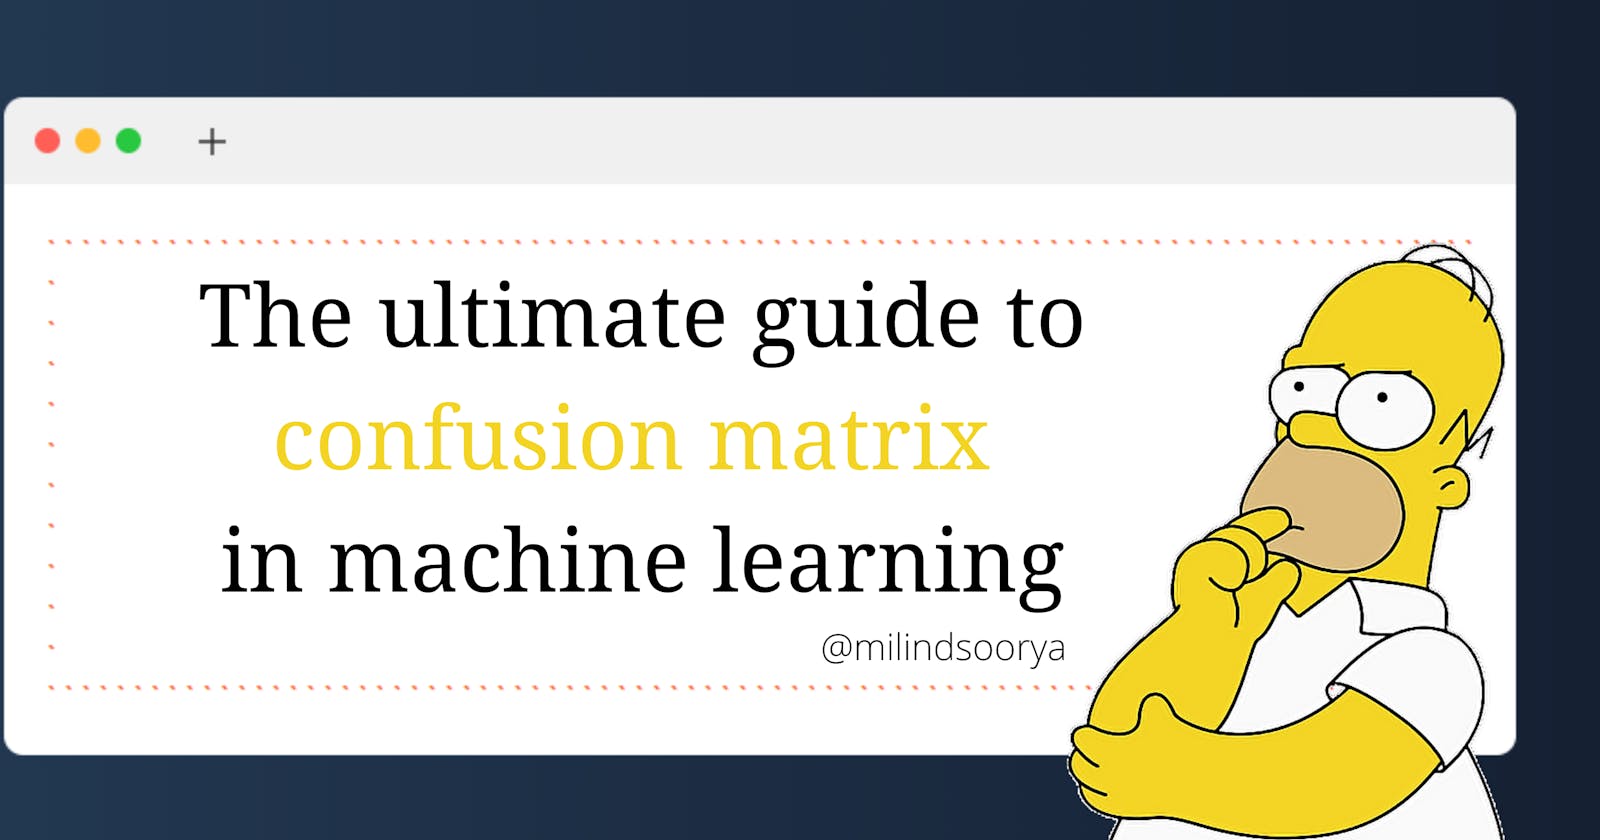 The ultimate guide to confusion matrix in machine learning